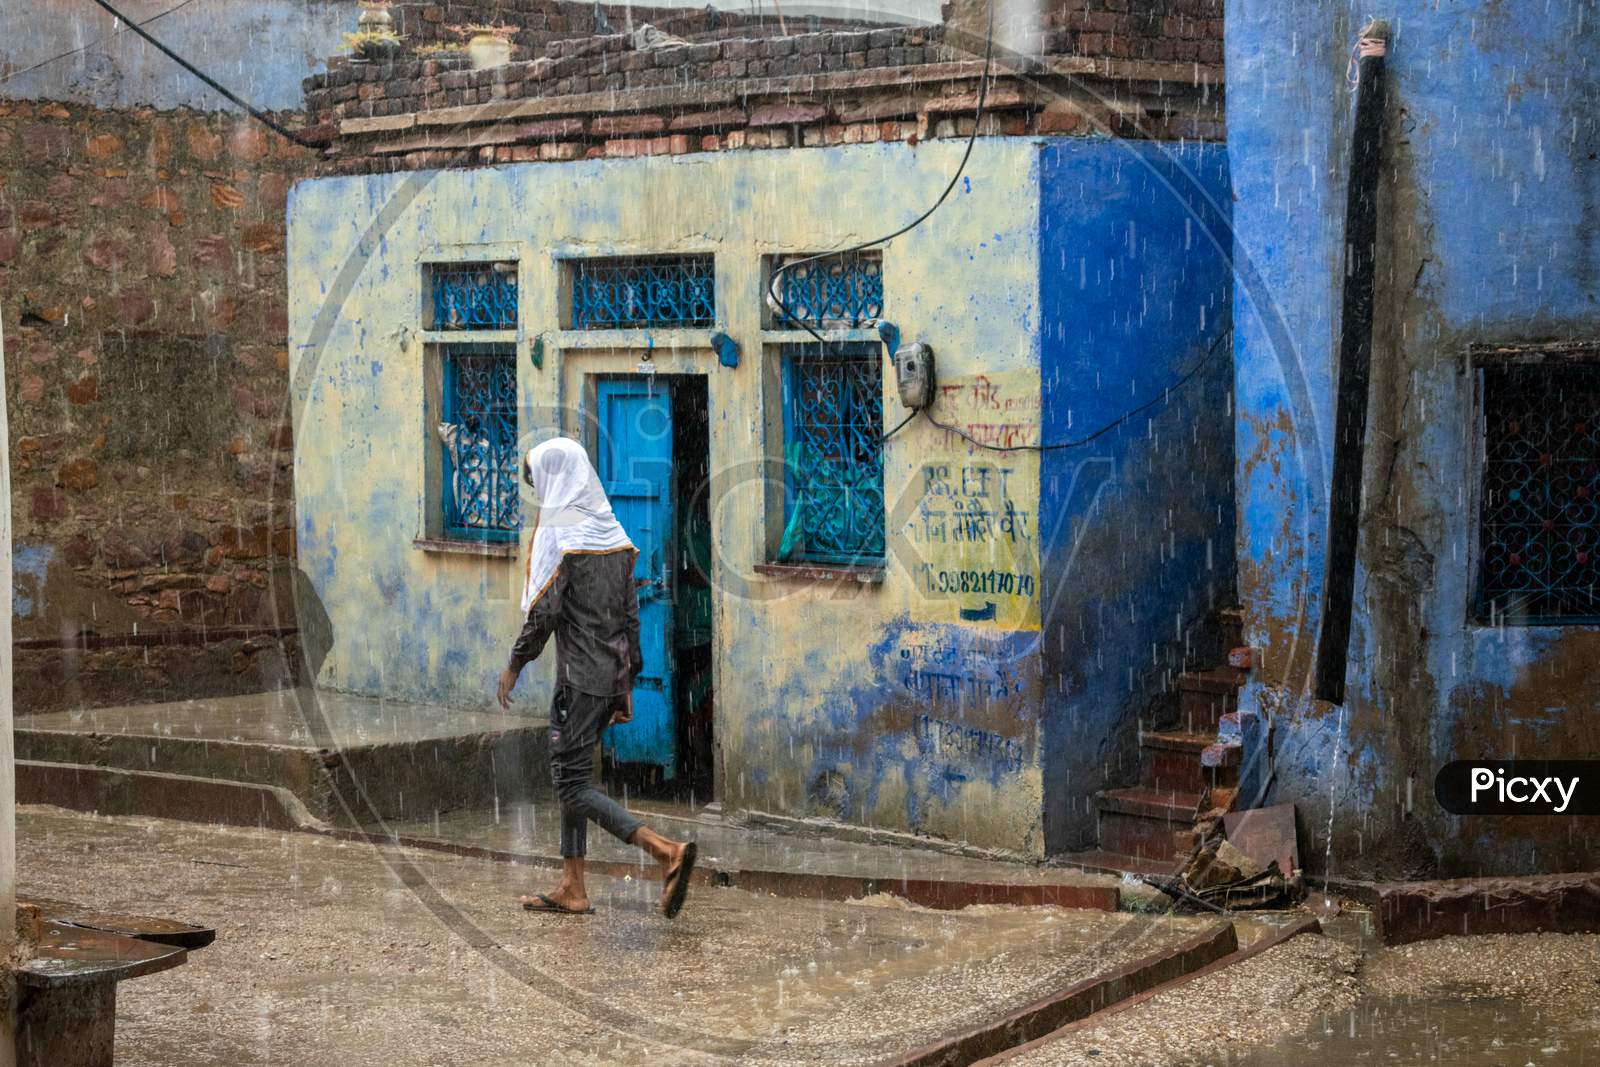 A man walks on a road while it rains heavily during monsoon season in Bharatpur